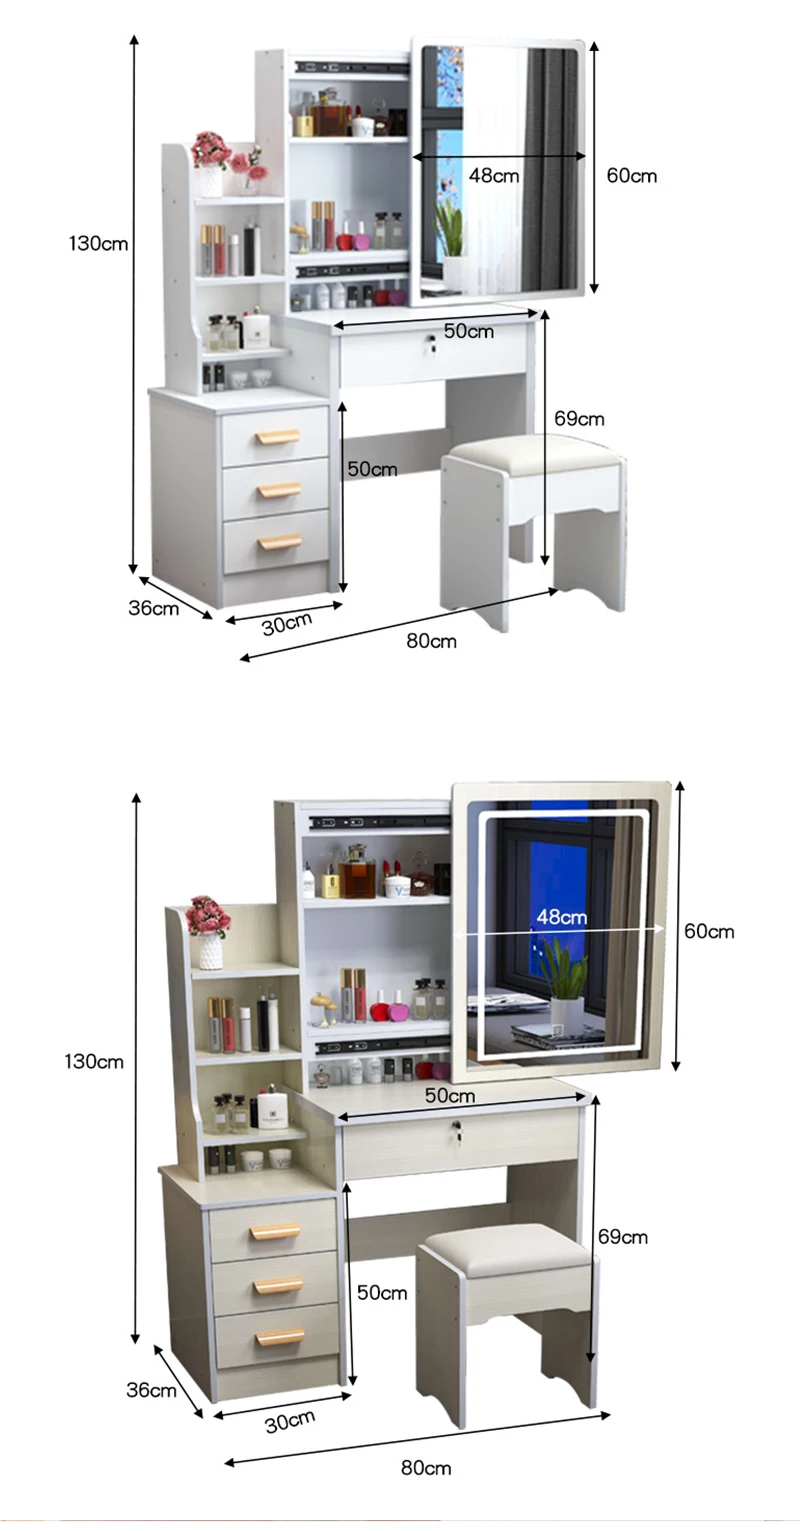 High Quality Modern European Drawers Storage Bedroom Furniture Nordic White Vanity Makeup Dressing Table With Mirror And Stool